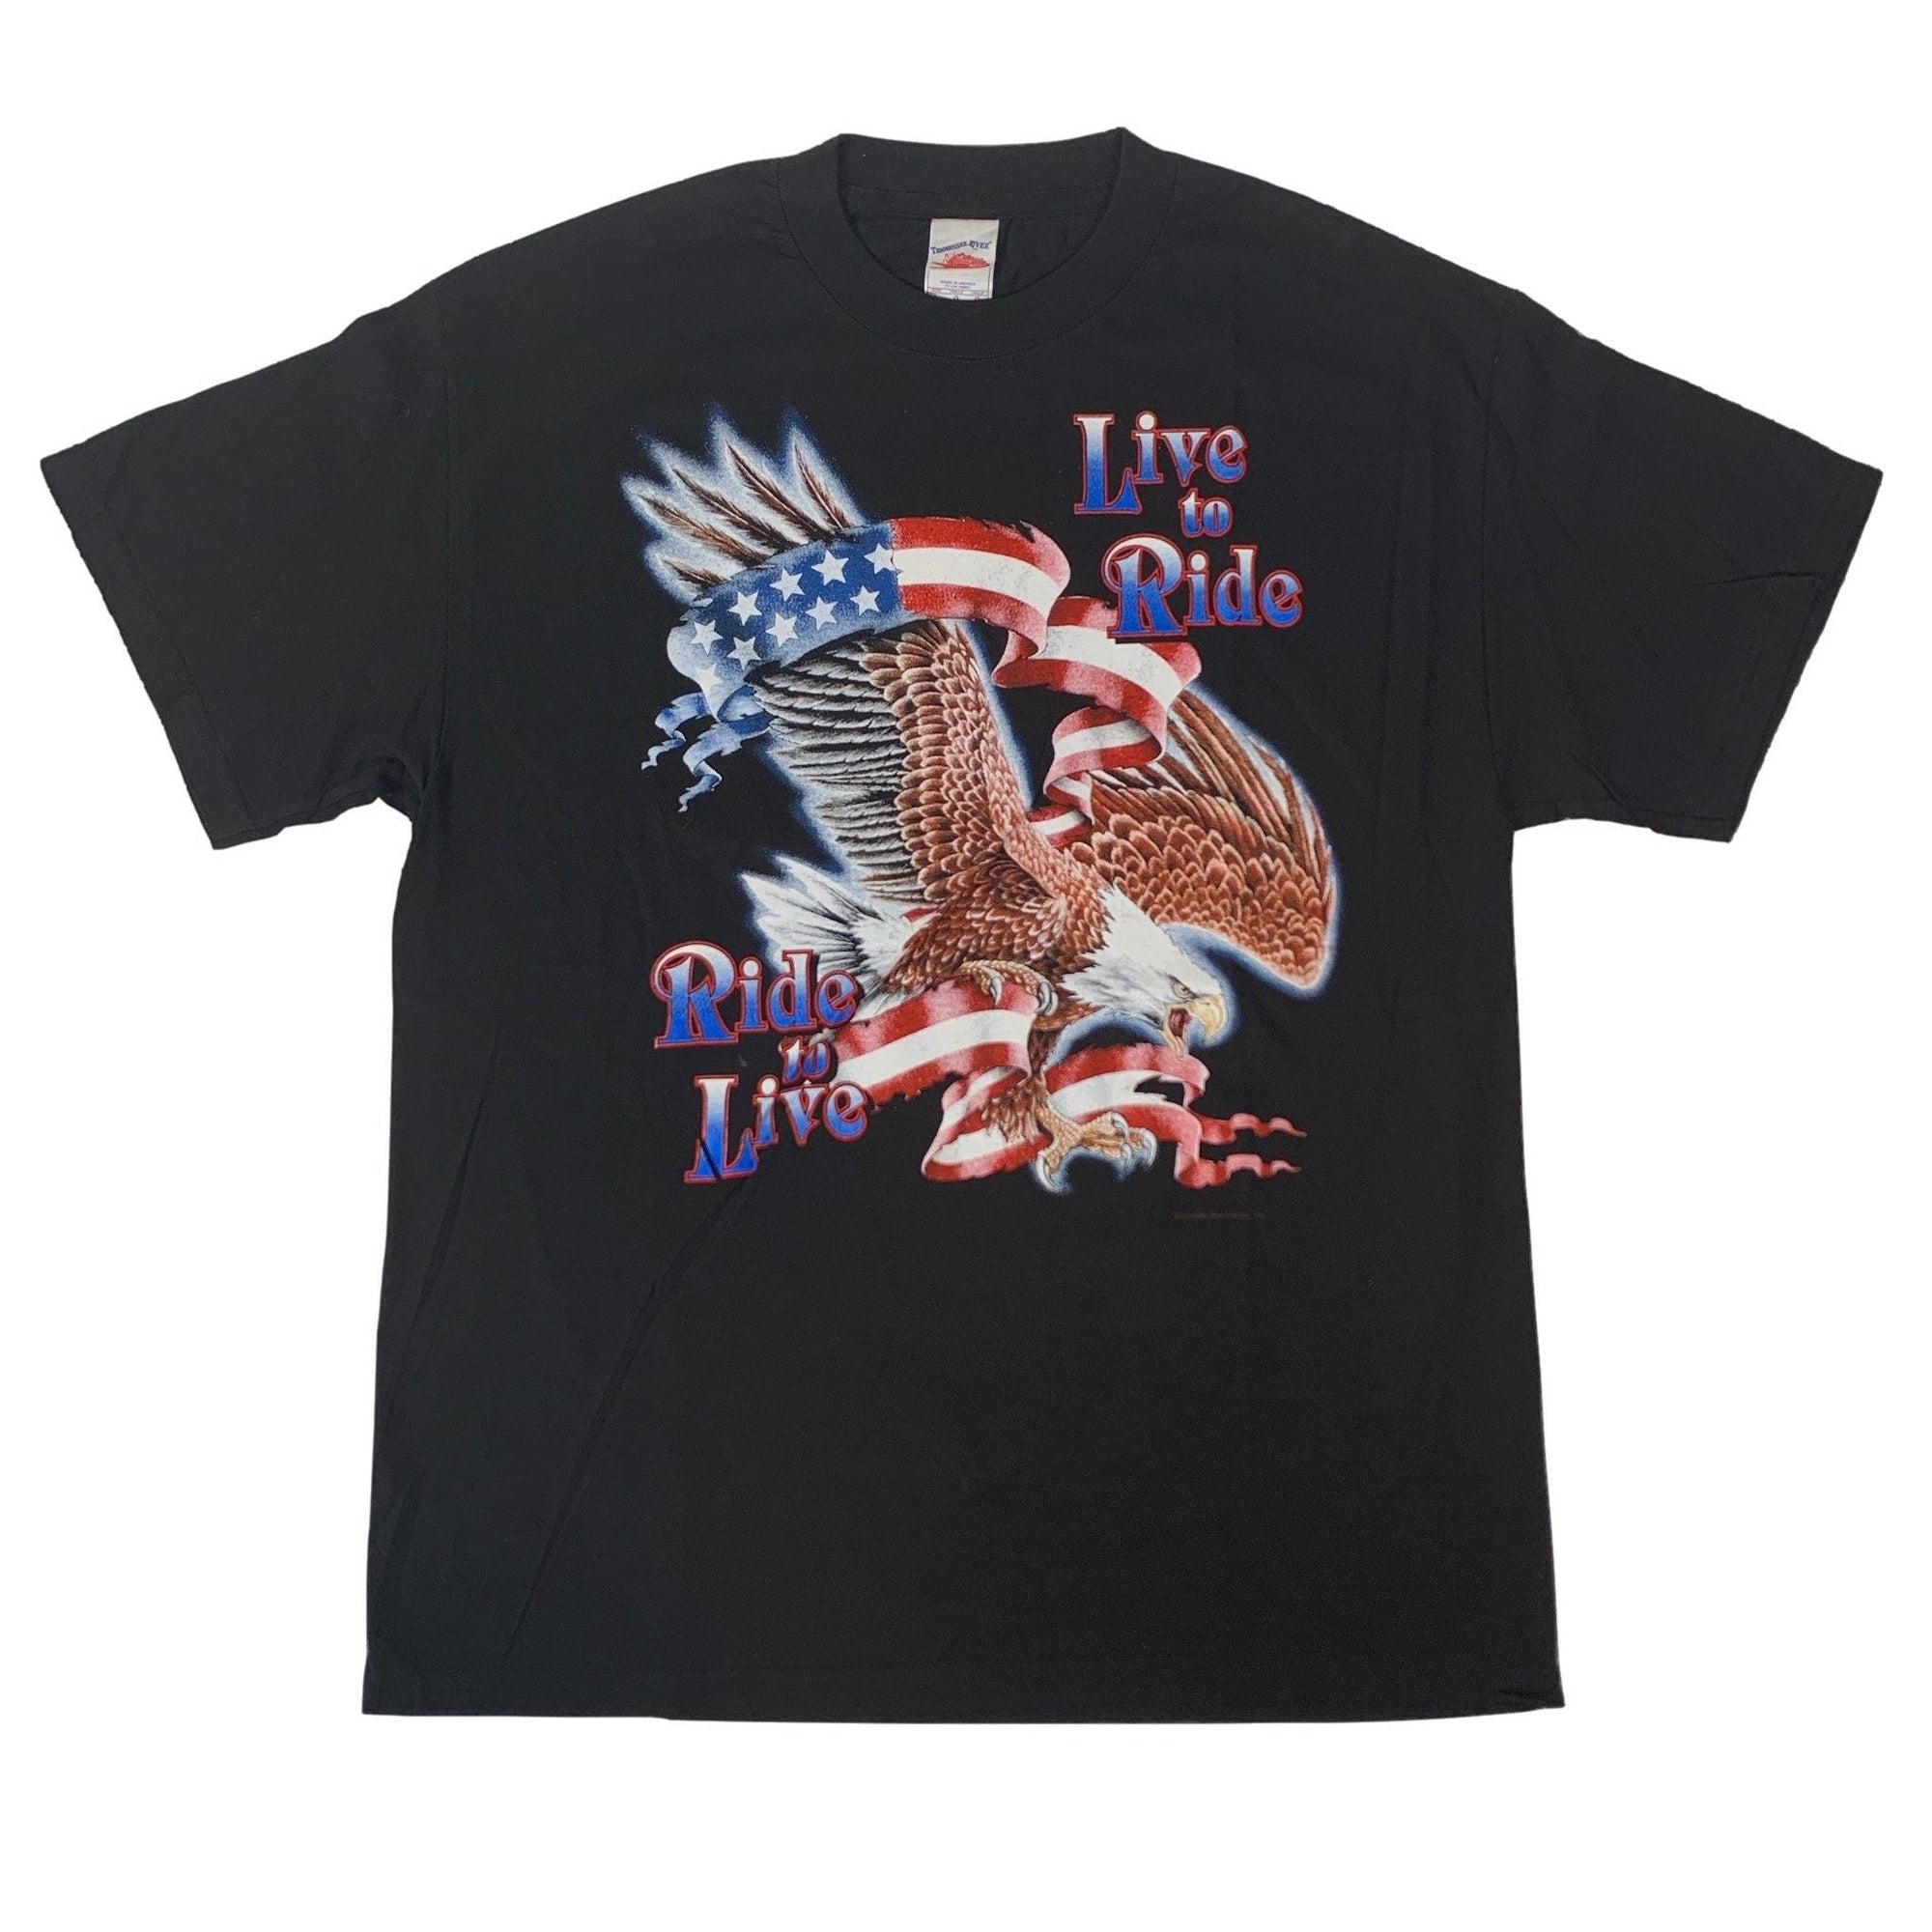 Vintage Live To Ride "Ride To Live" T-Shirt - jointcustodydc